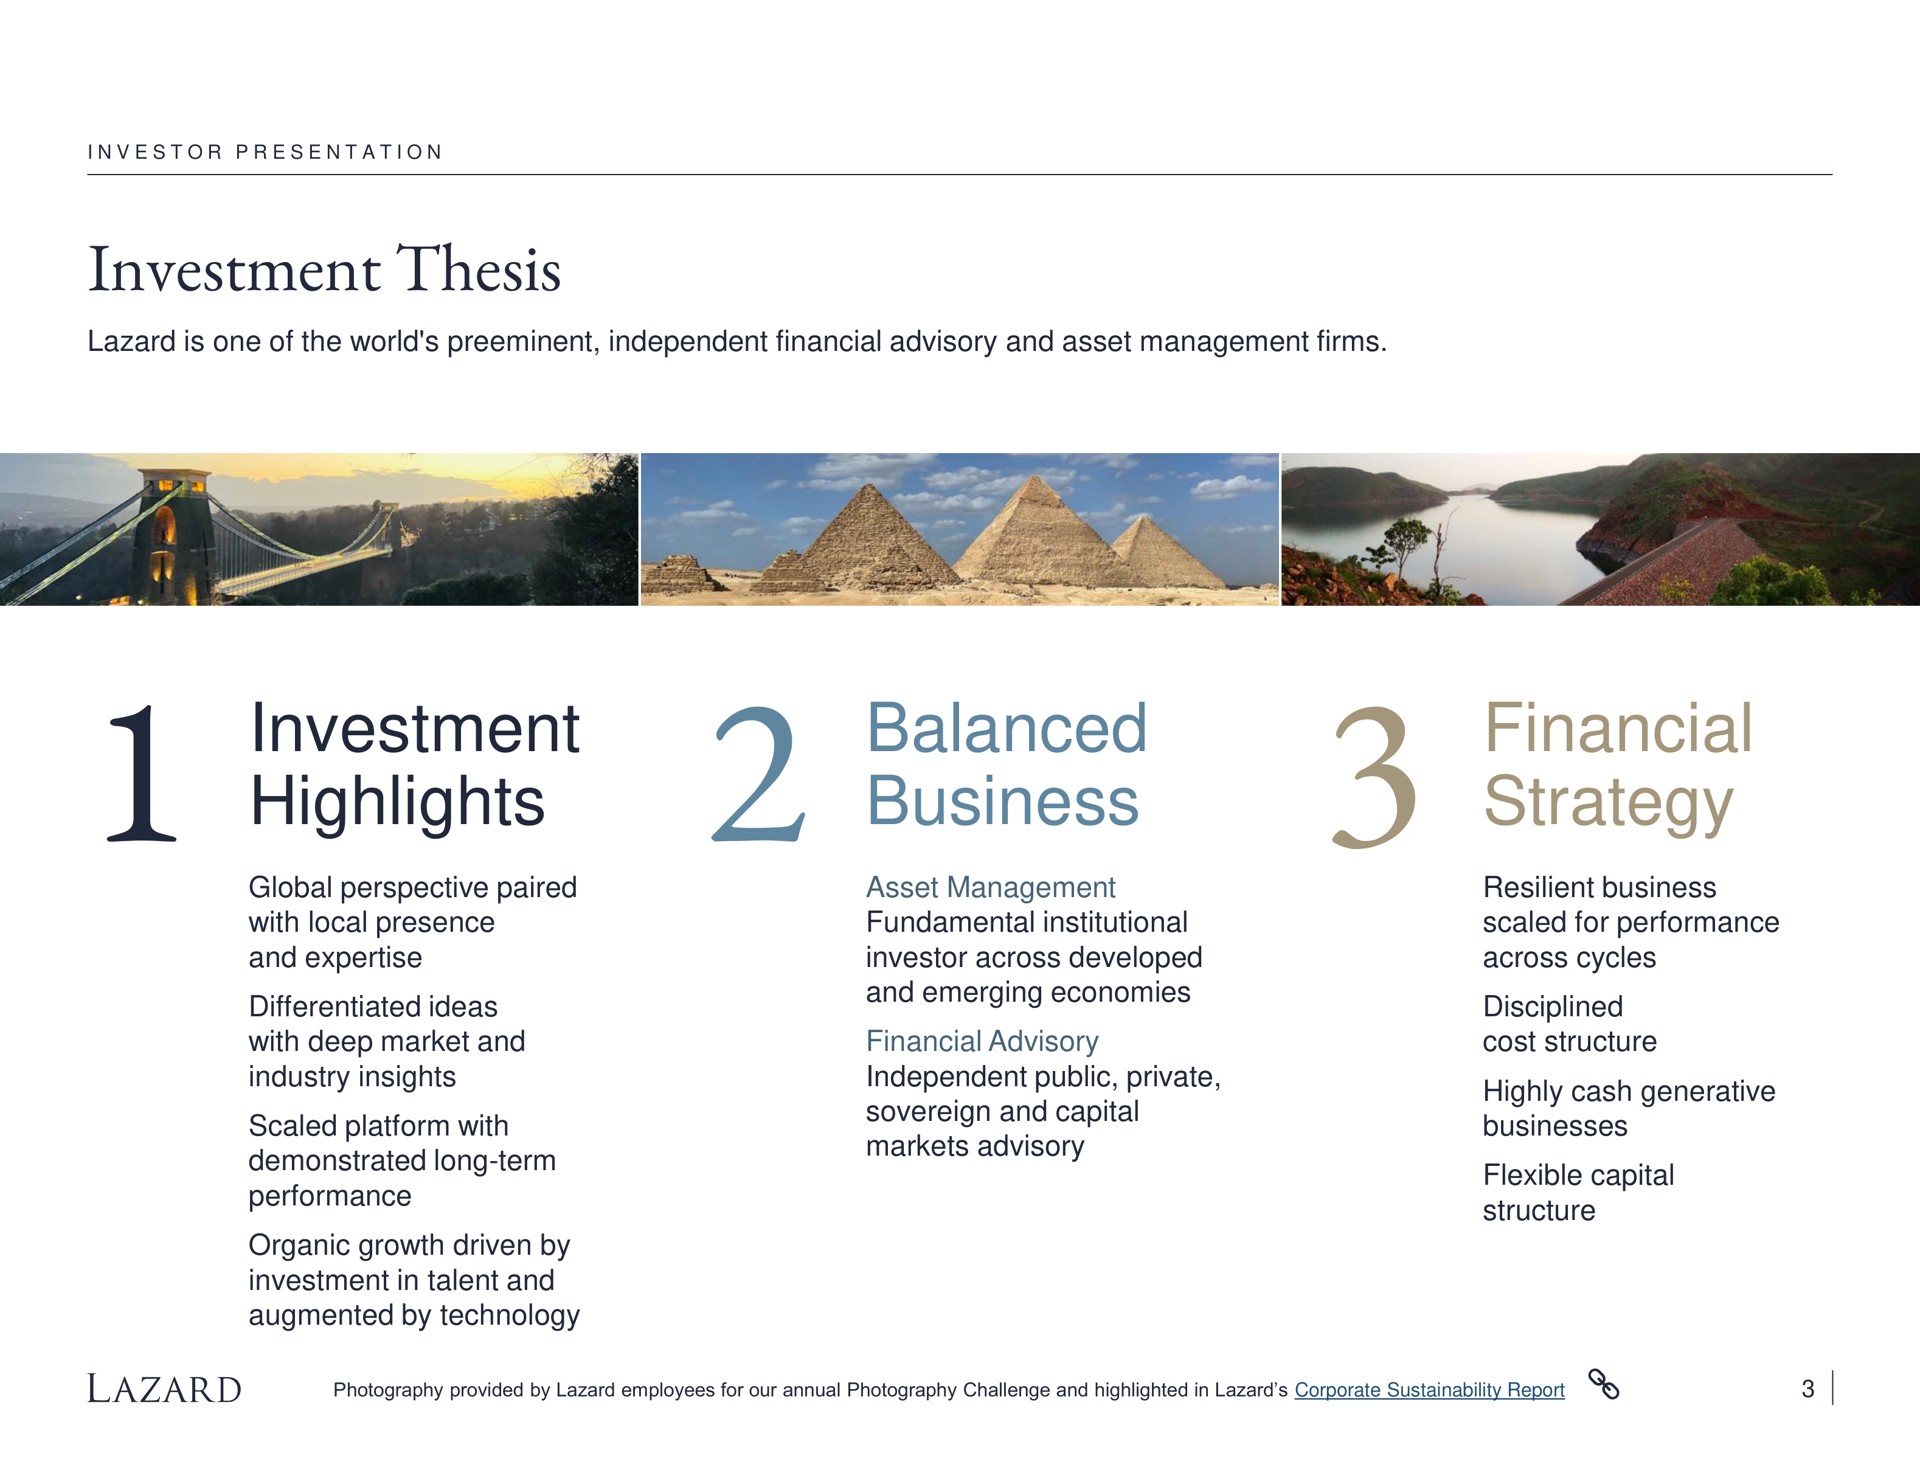 investment thesis investment highlights balanced business financial strategy | Lazard